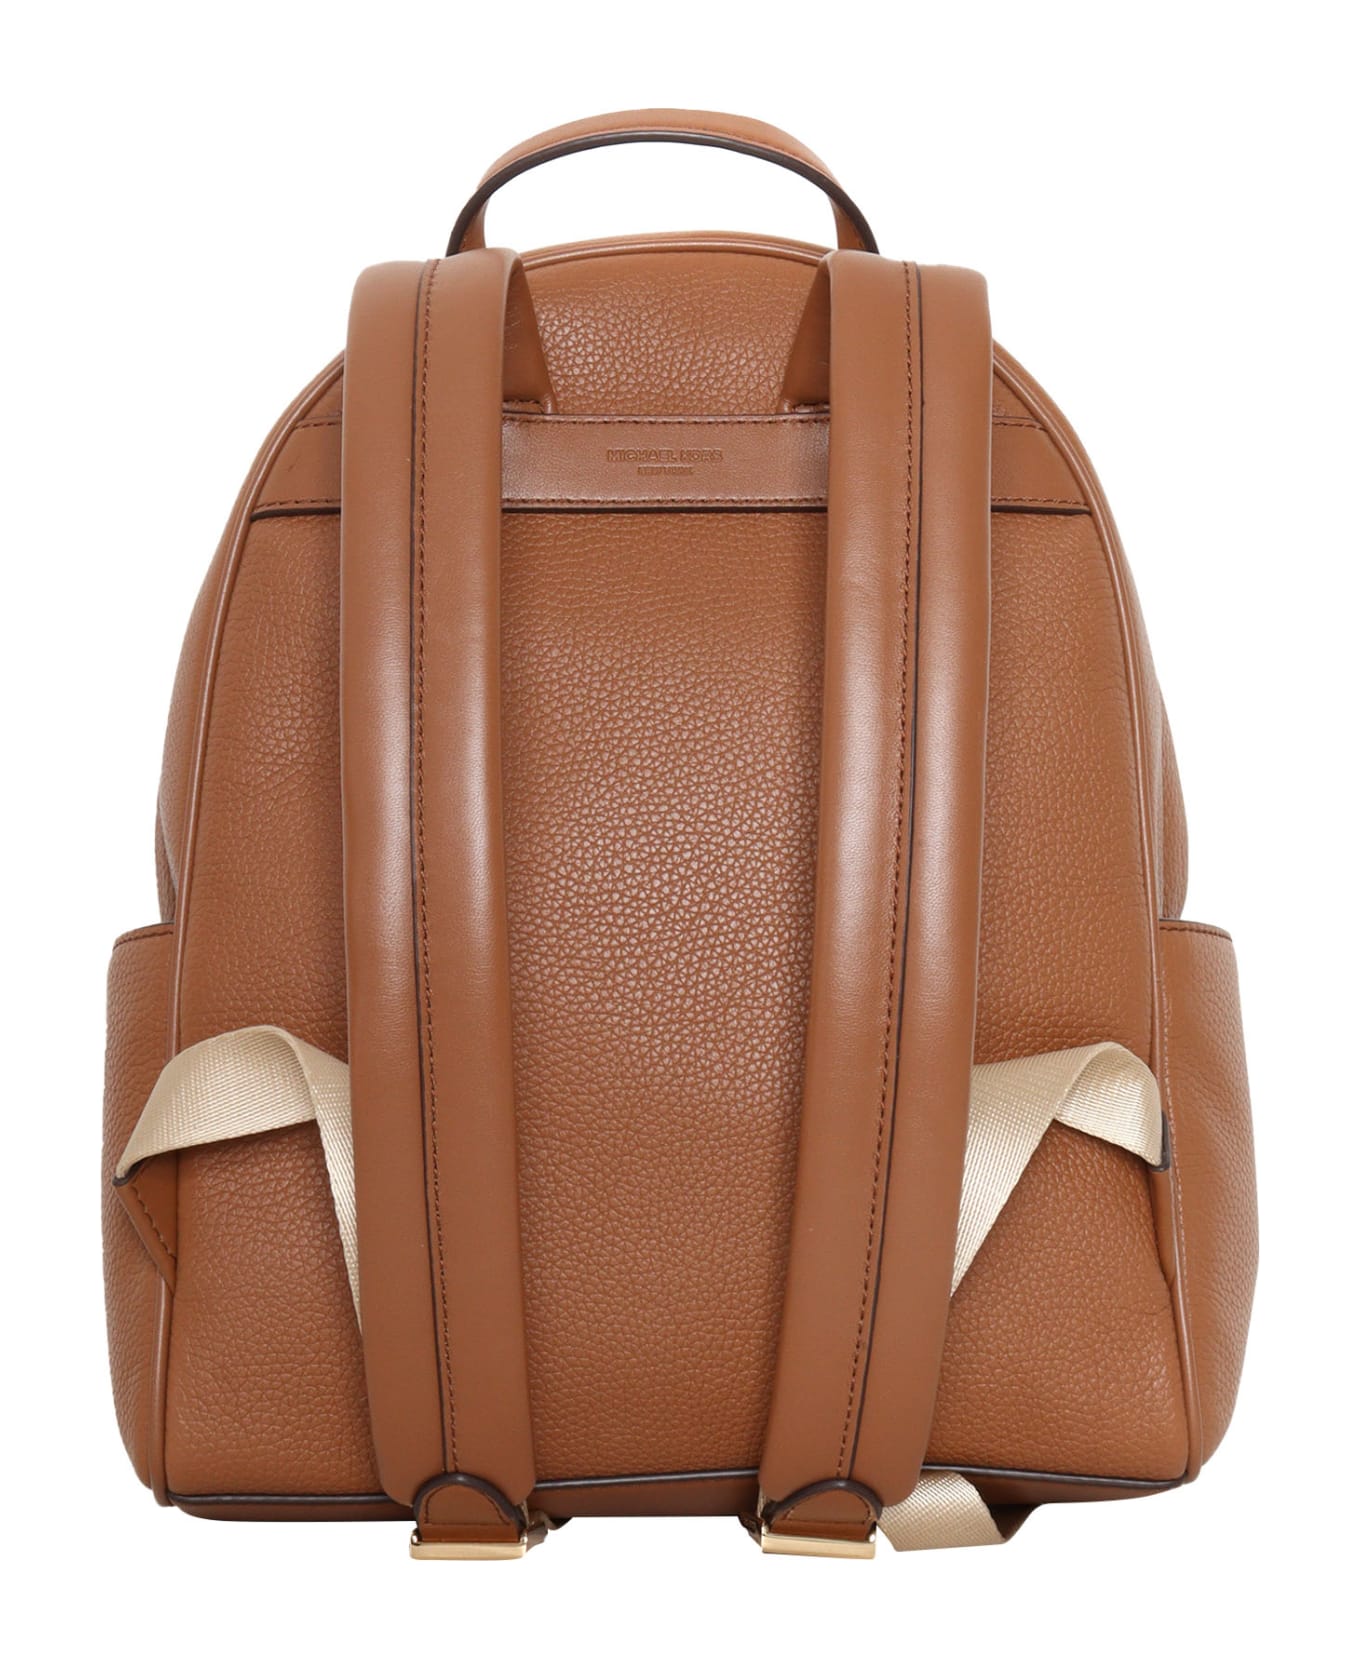 Michael Kors Brown Leather Backpack - BROWN バックパック